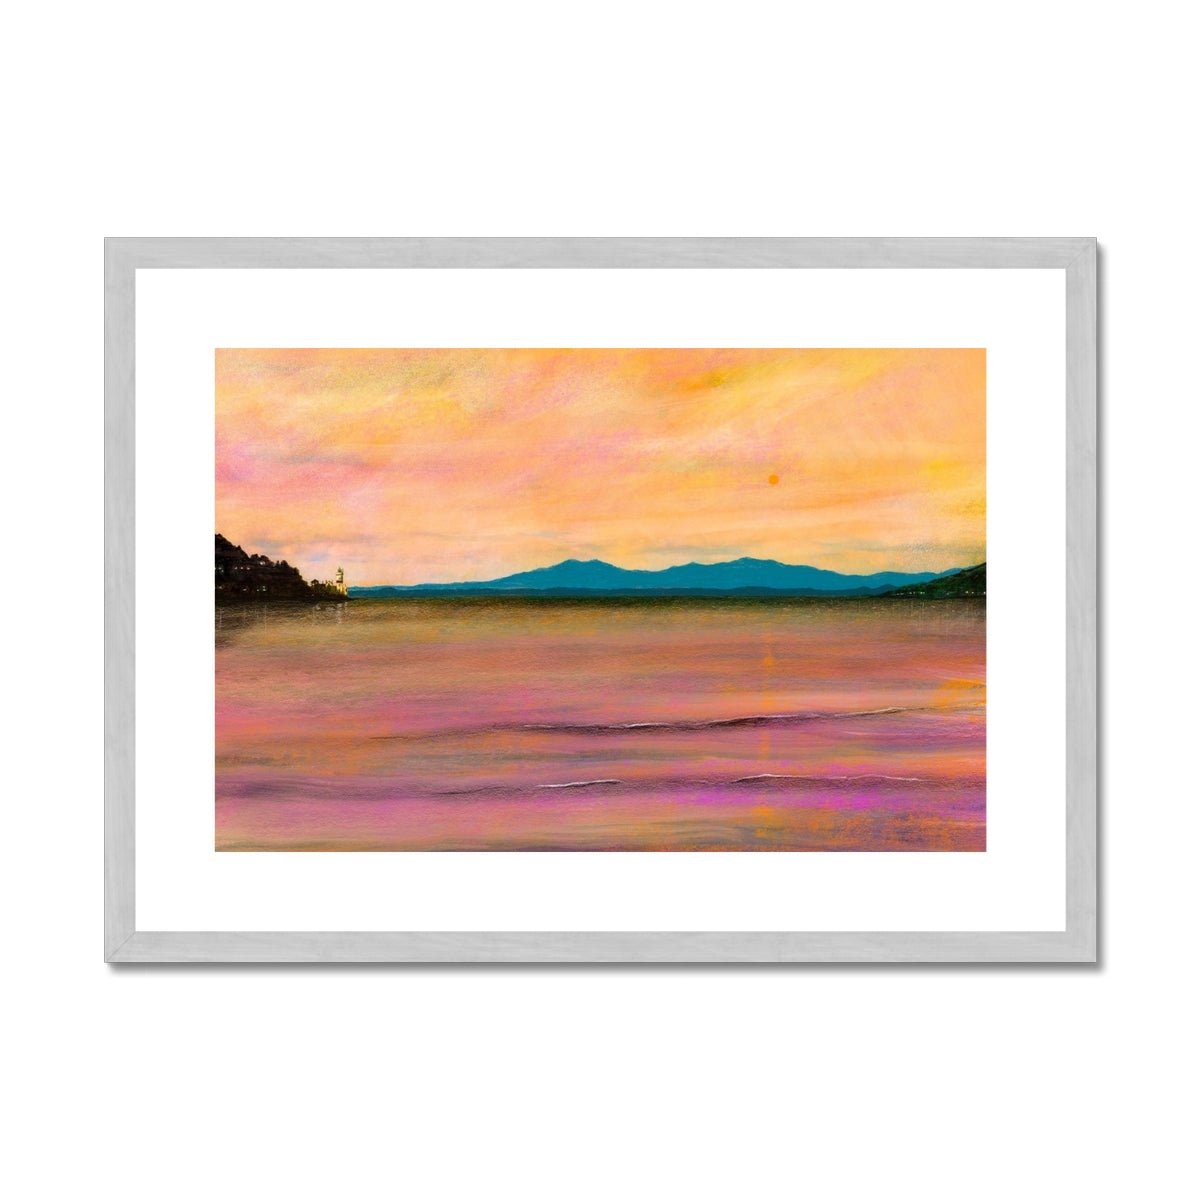 Dusk Over Arran & The Cloch Lighthouse Painting | Antique Framed & Mounted Prints From Scotland-Antique Framed & Mounted Prints-Arran Art Gallery-A2 Landscape-Silver Frame-Paintings, Prints, Homeware, Art Gifts From Scotland By Scottish Artist Kevin Hunter